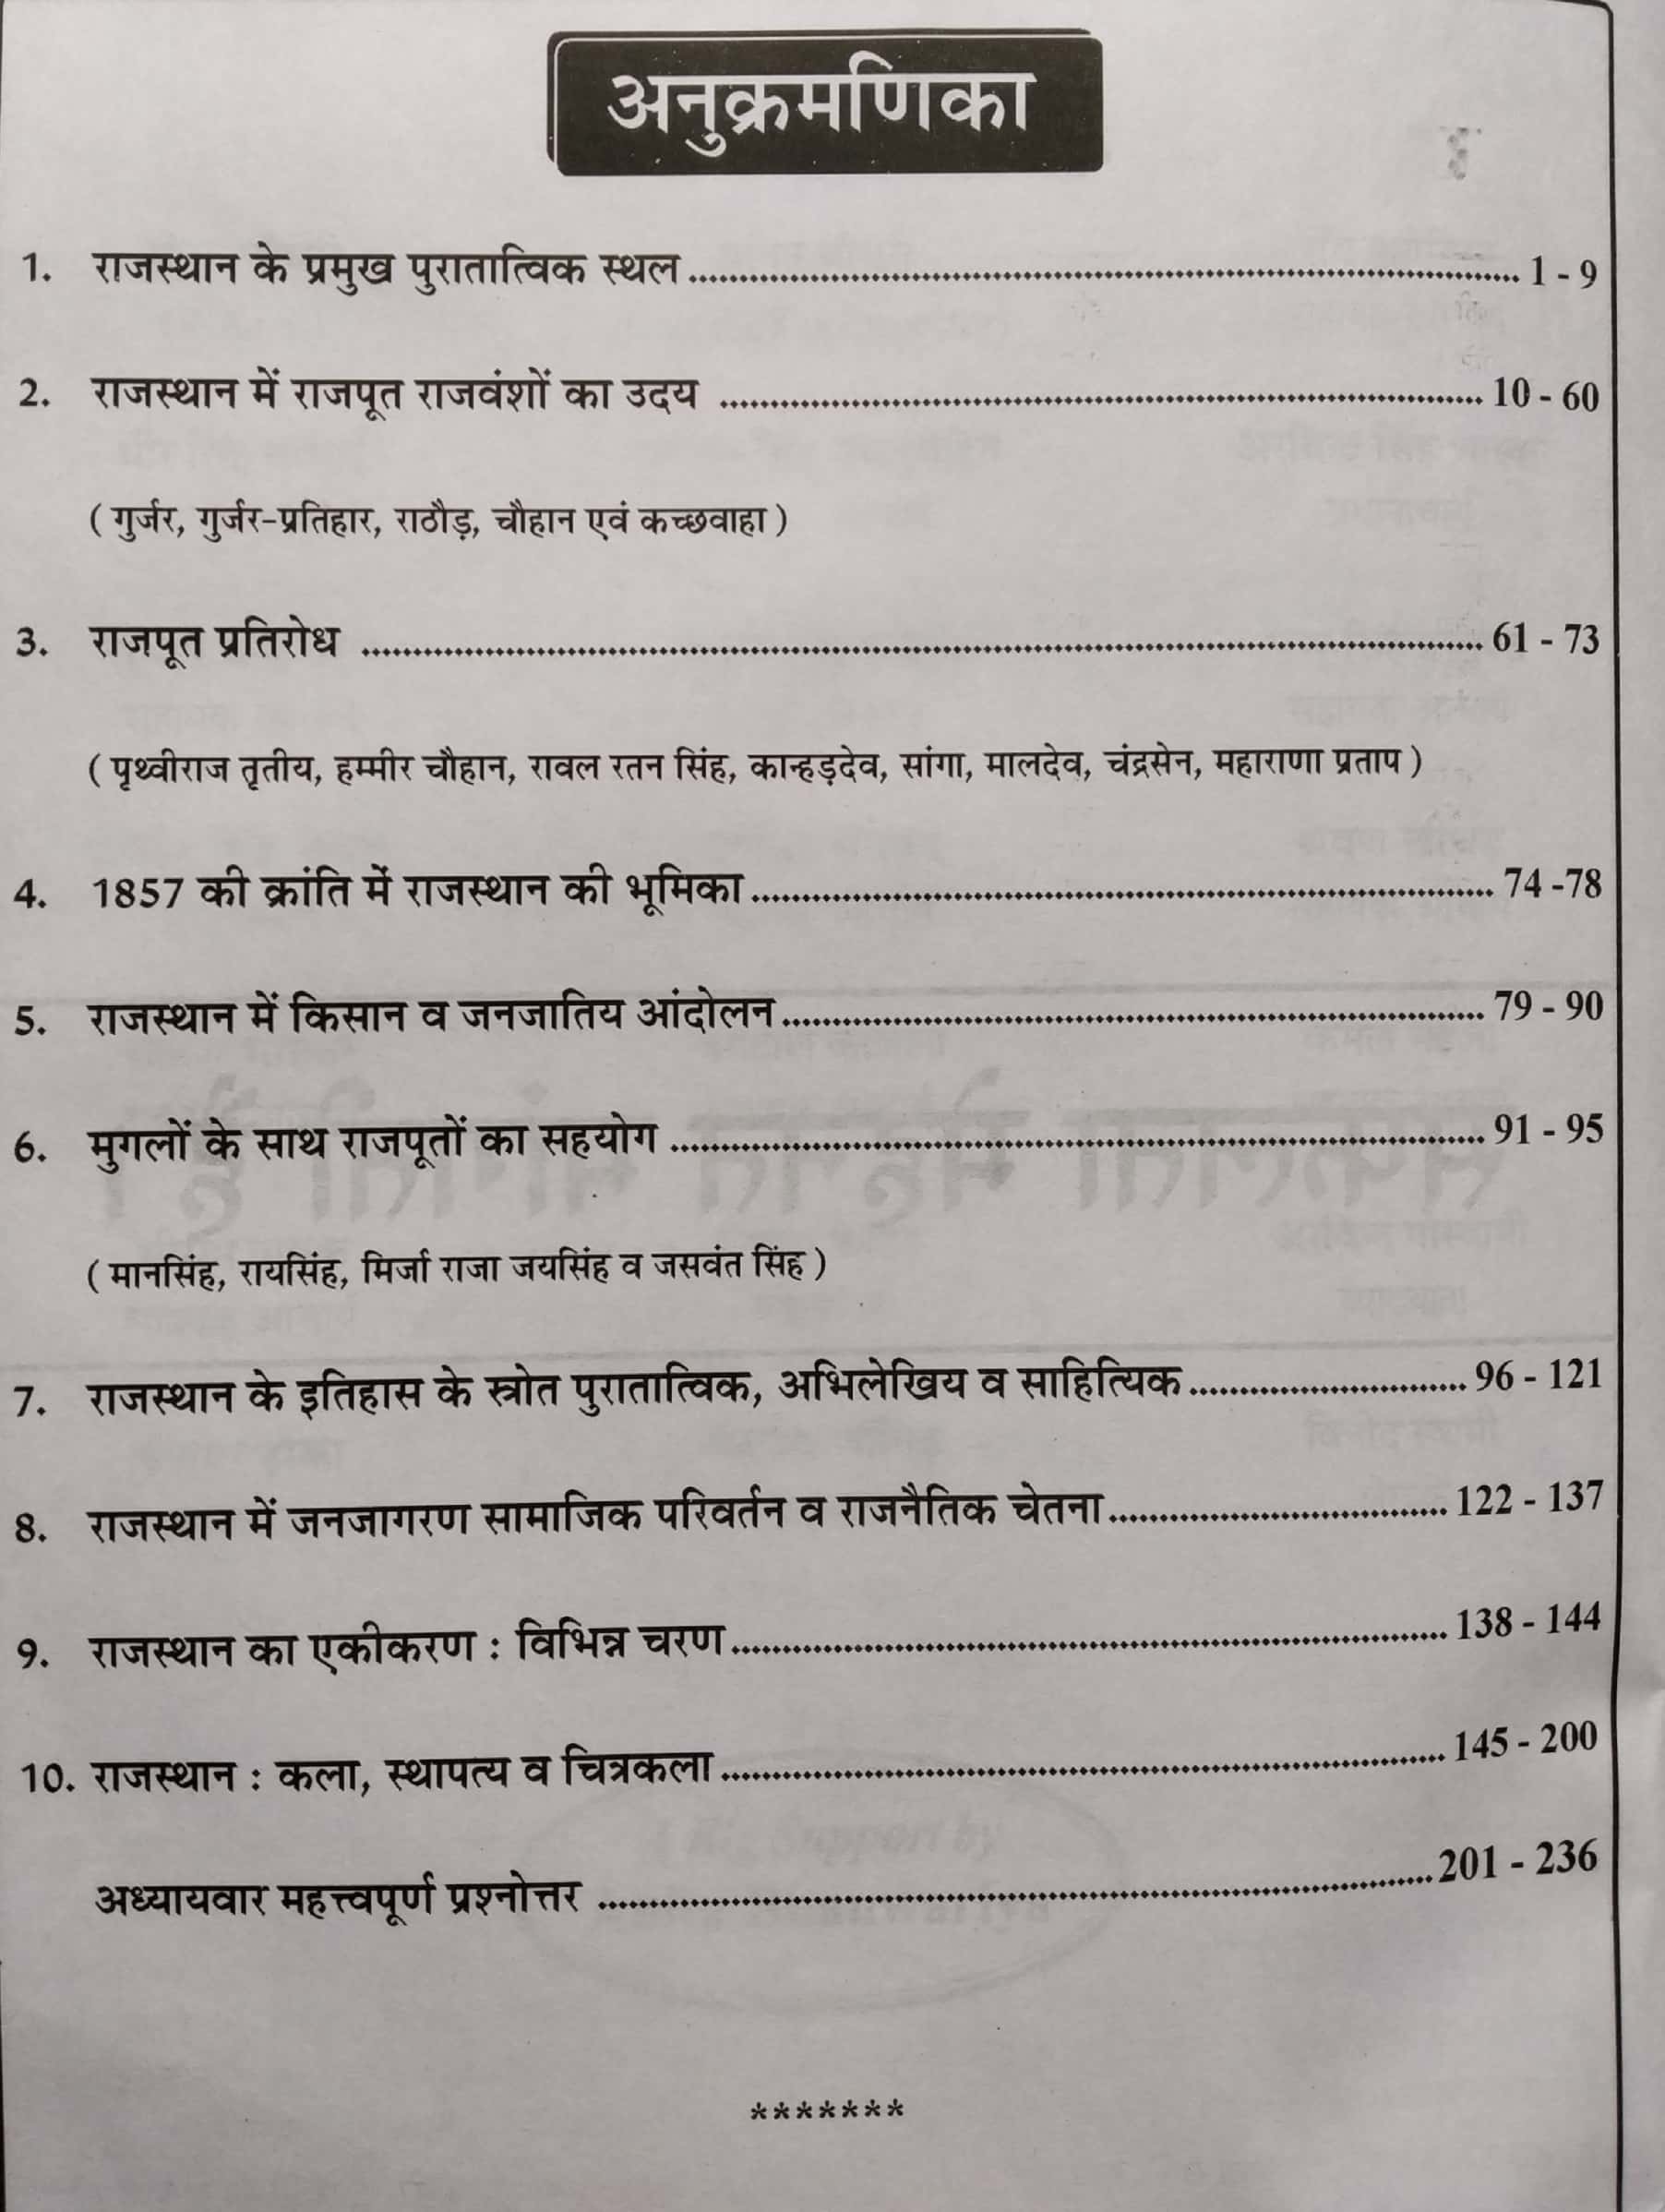 Nath First Grade Rajasthan History And Art And Culture (Itihas Evam Kala Evam Sanskriti) 2nd Paper By Pawan Bhanwariya For RPSC 1st Grade School Lecturer Examination Latest Edition